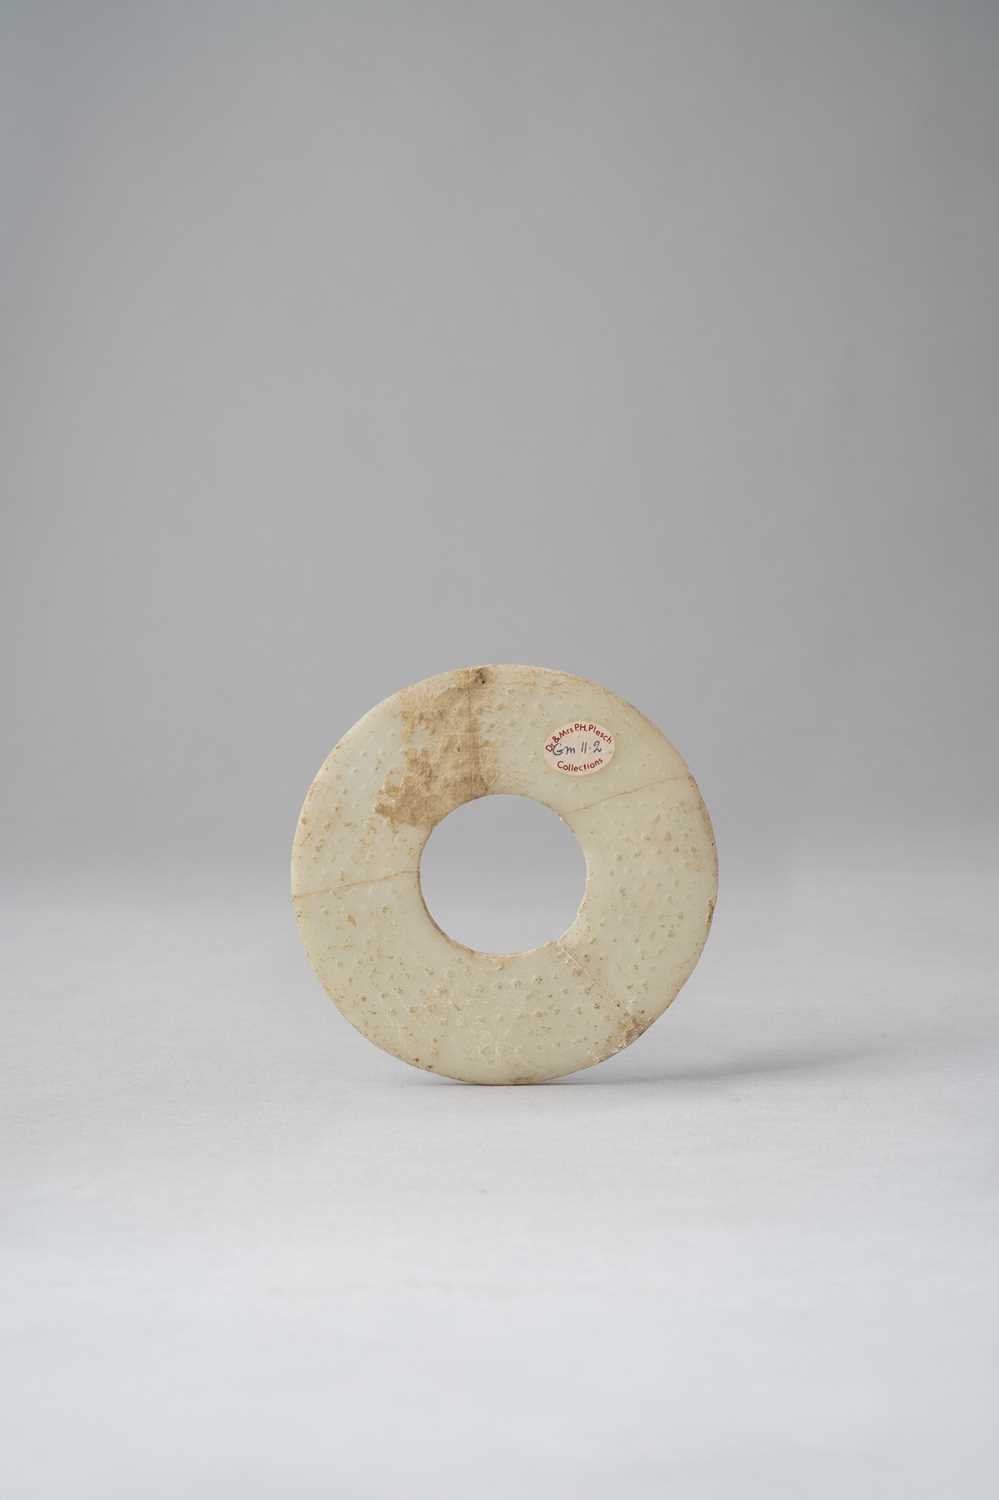 TWO CHINESE GLASS DISCS, BI HAN DYNASTY The smaller with a buff/off-white opaque surface, - Image 2 of 3